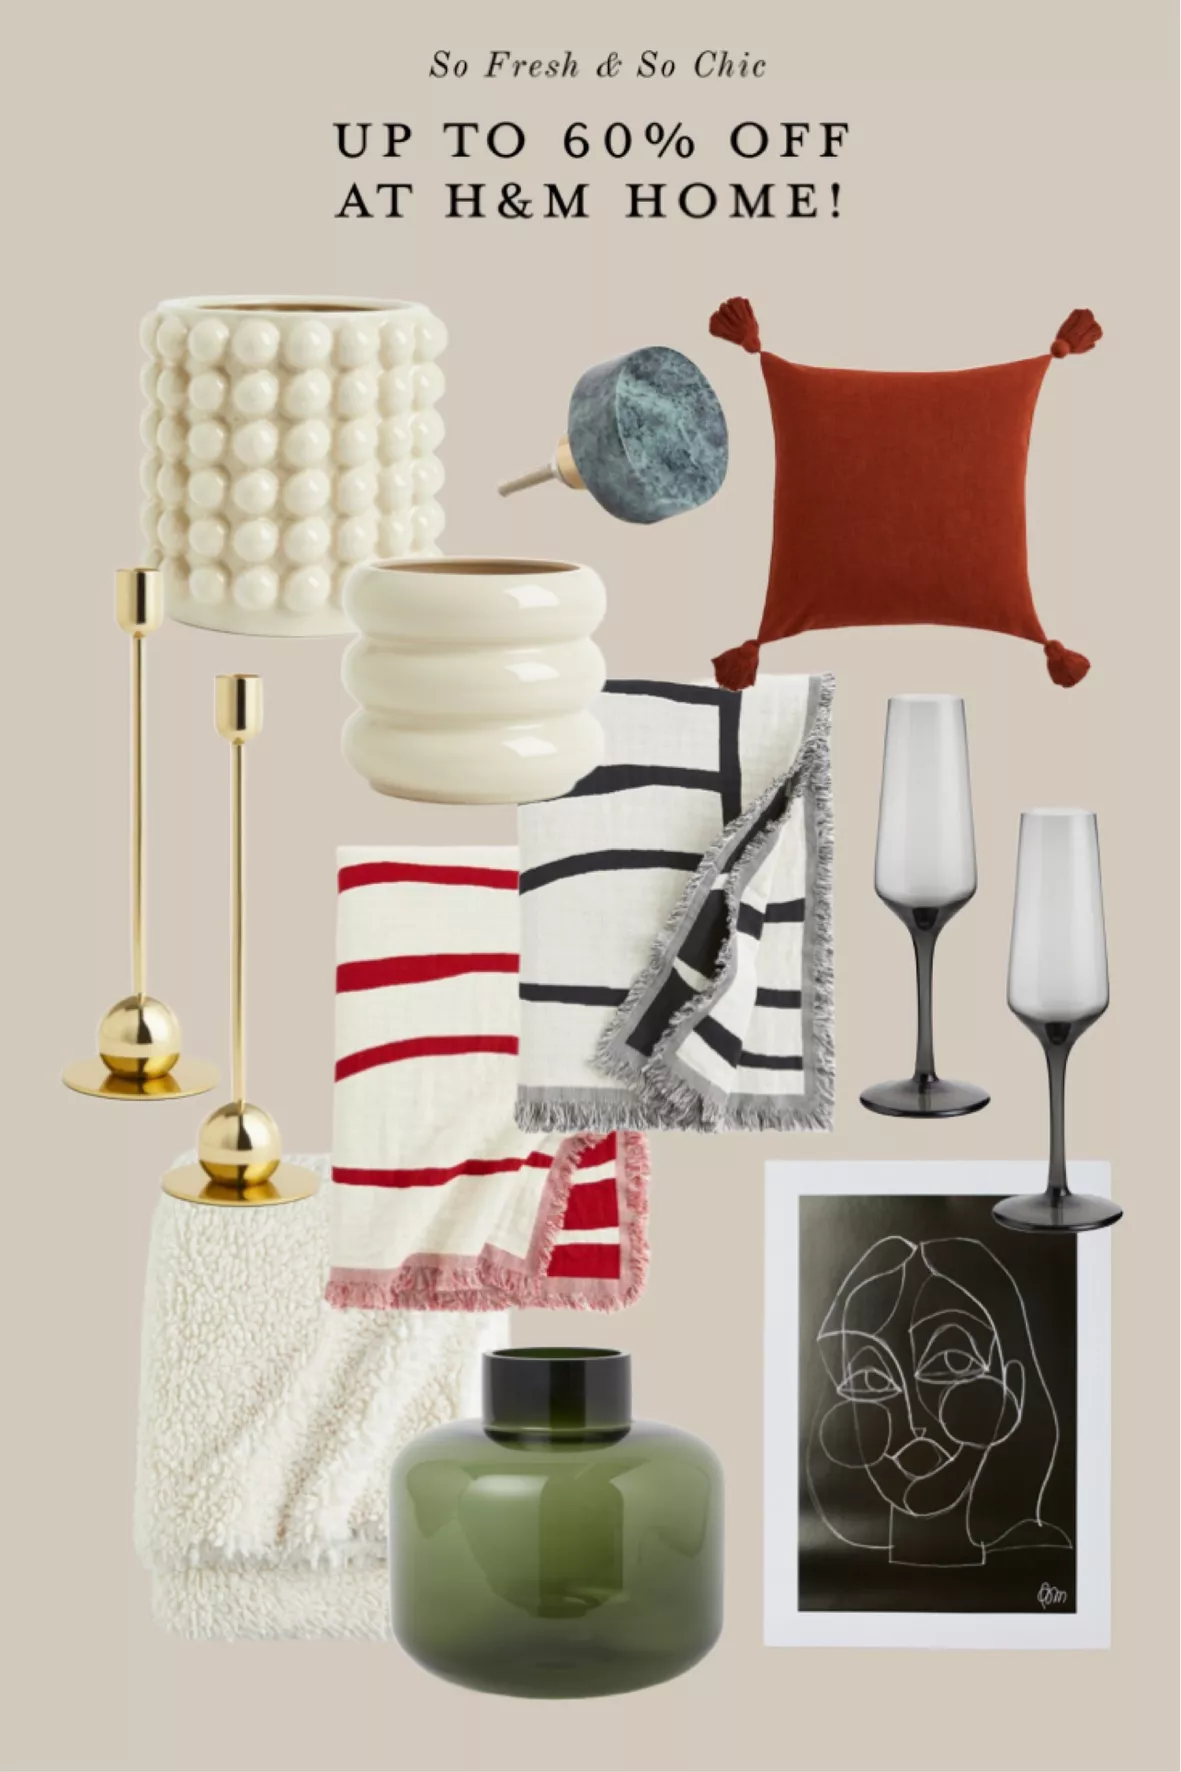 Such Good Things at H&M Home for Fall! - So Fresh & So Chic